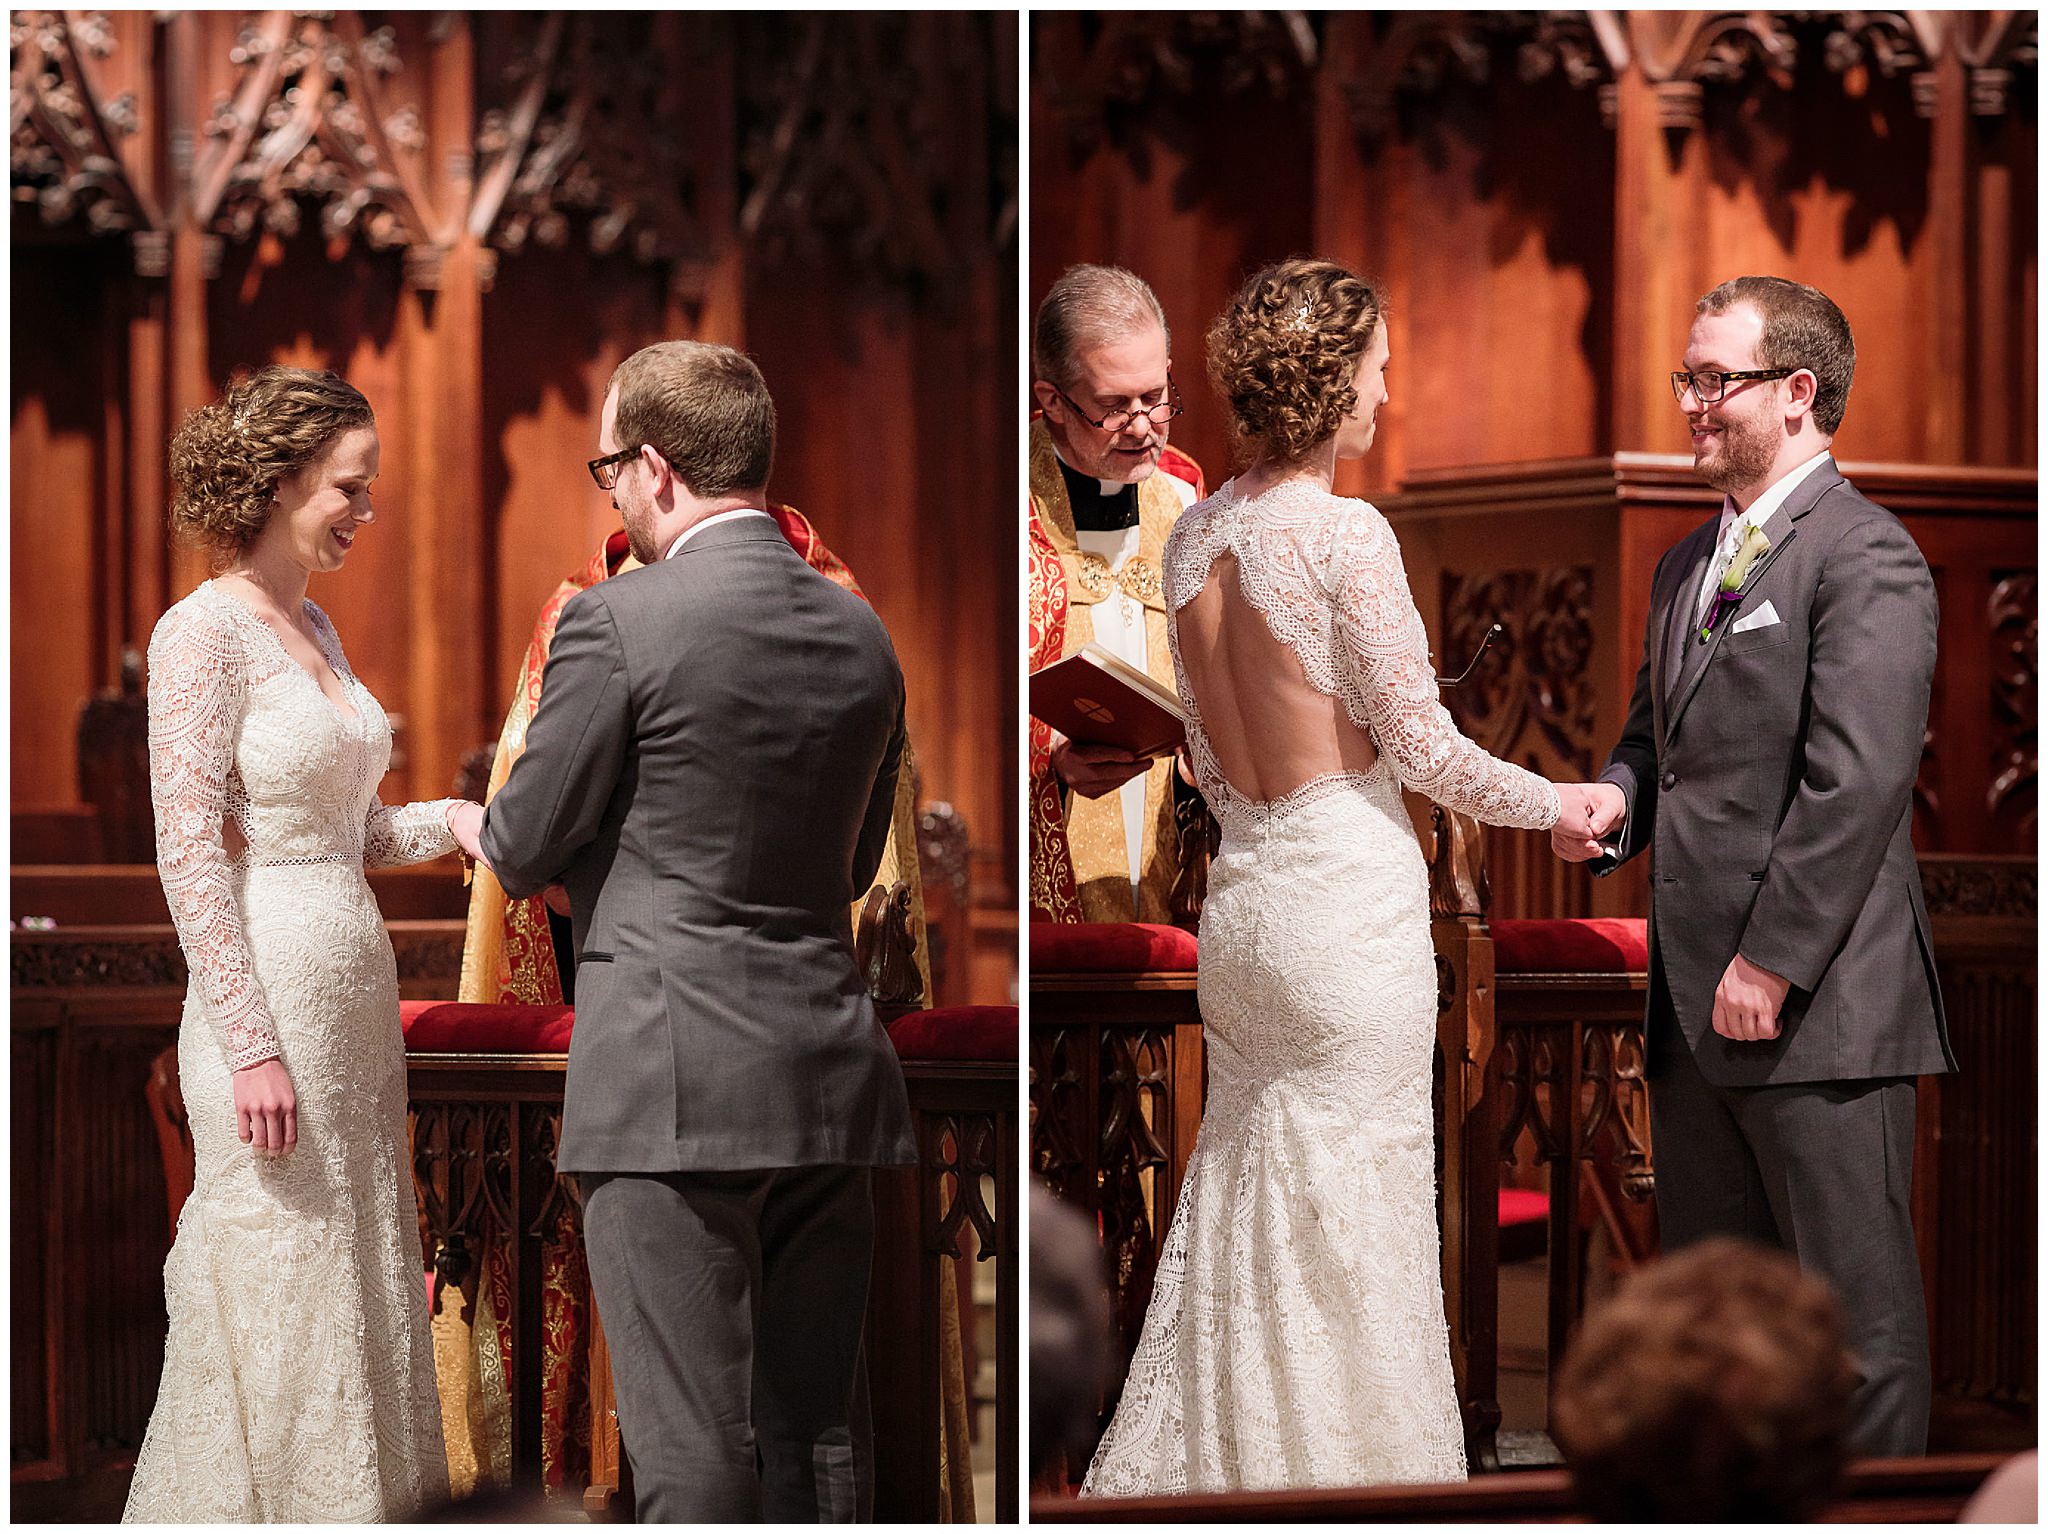 Exchange of vows and rings at a Heinz Memorial Chapel wedding